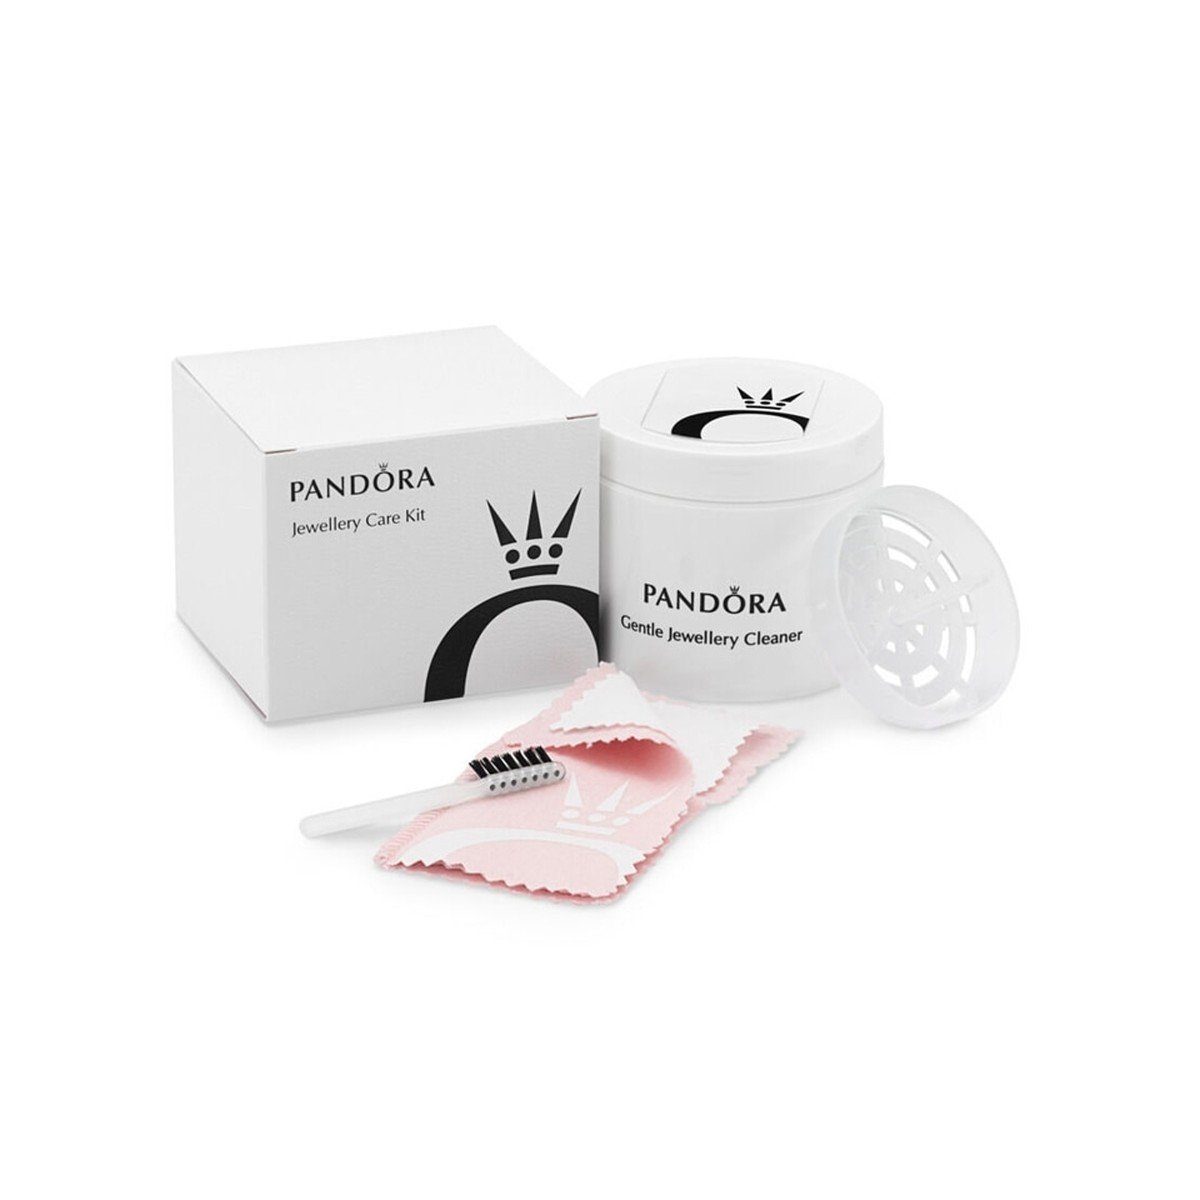 Pandora St. Vital - Let your Pandora collection sparkle and shine! Our $20 cleaning  kit (includes solution, brush and polishing cloth) is specifically  formulated to gently yet effectively clean your Pandora jewelrythe